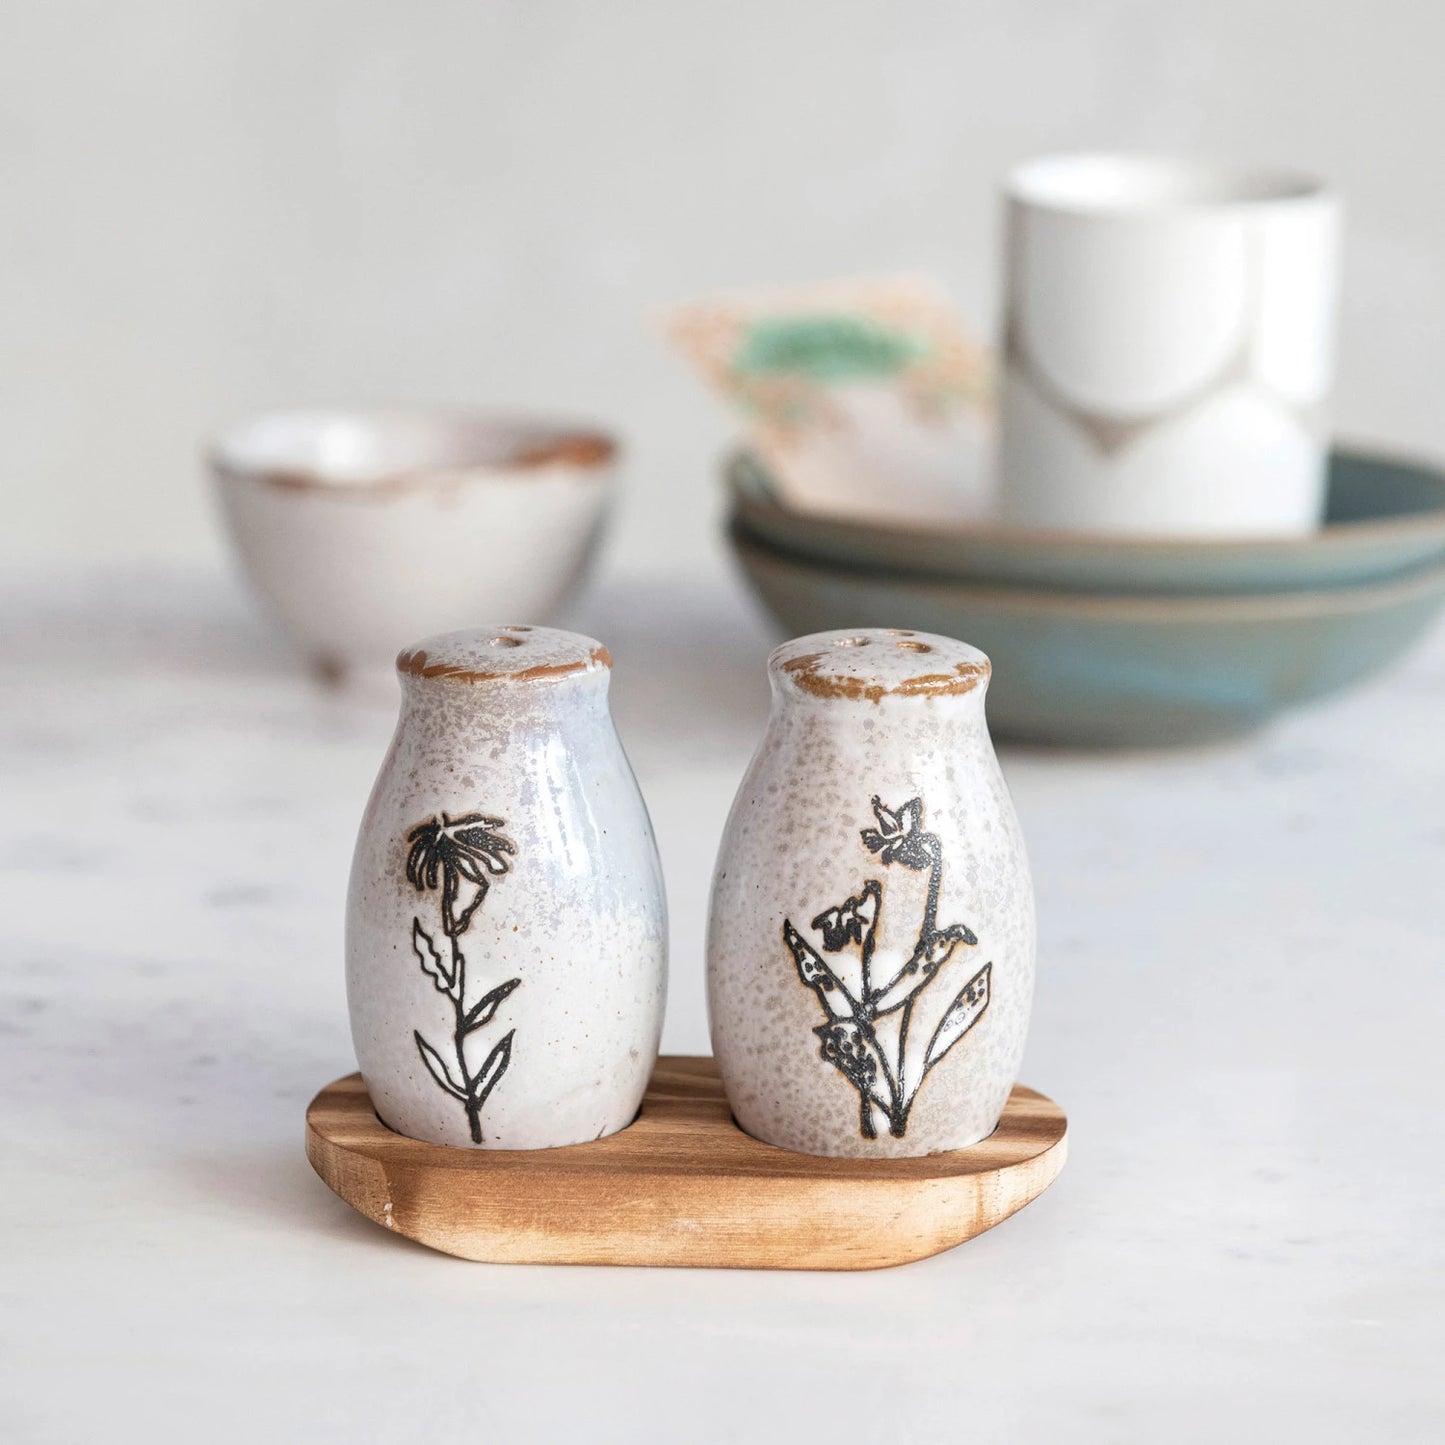 Flora Stoneware Salt & Pepper Shakers with Tray